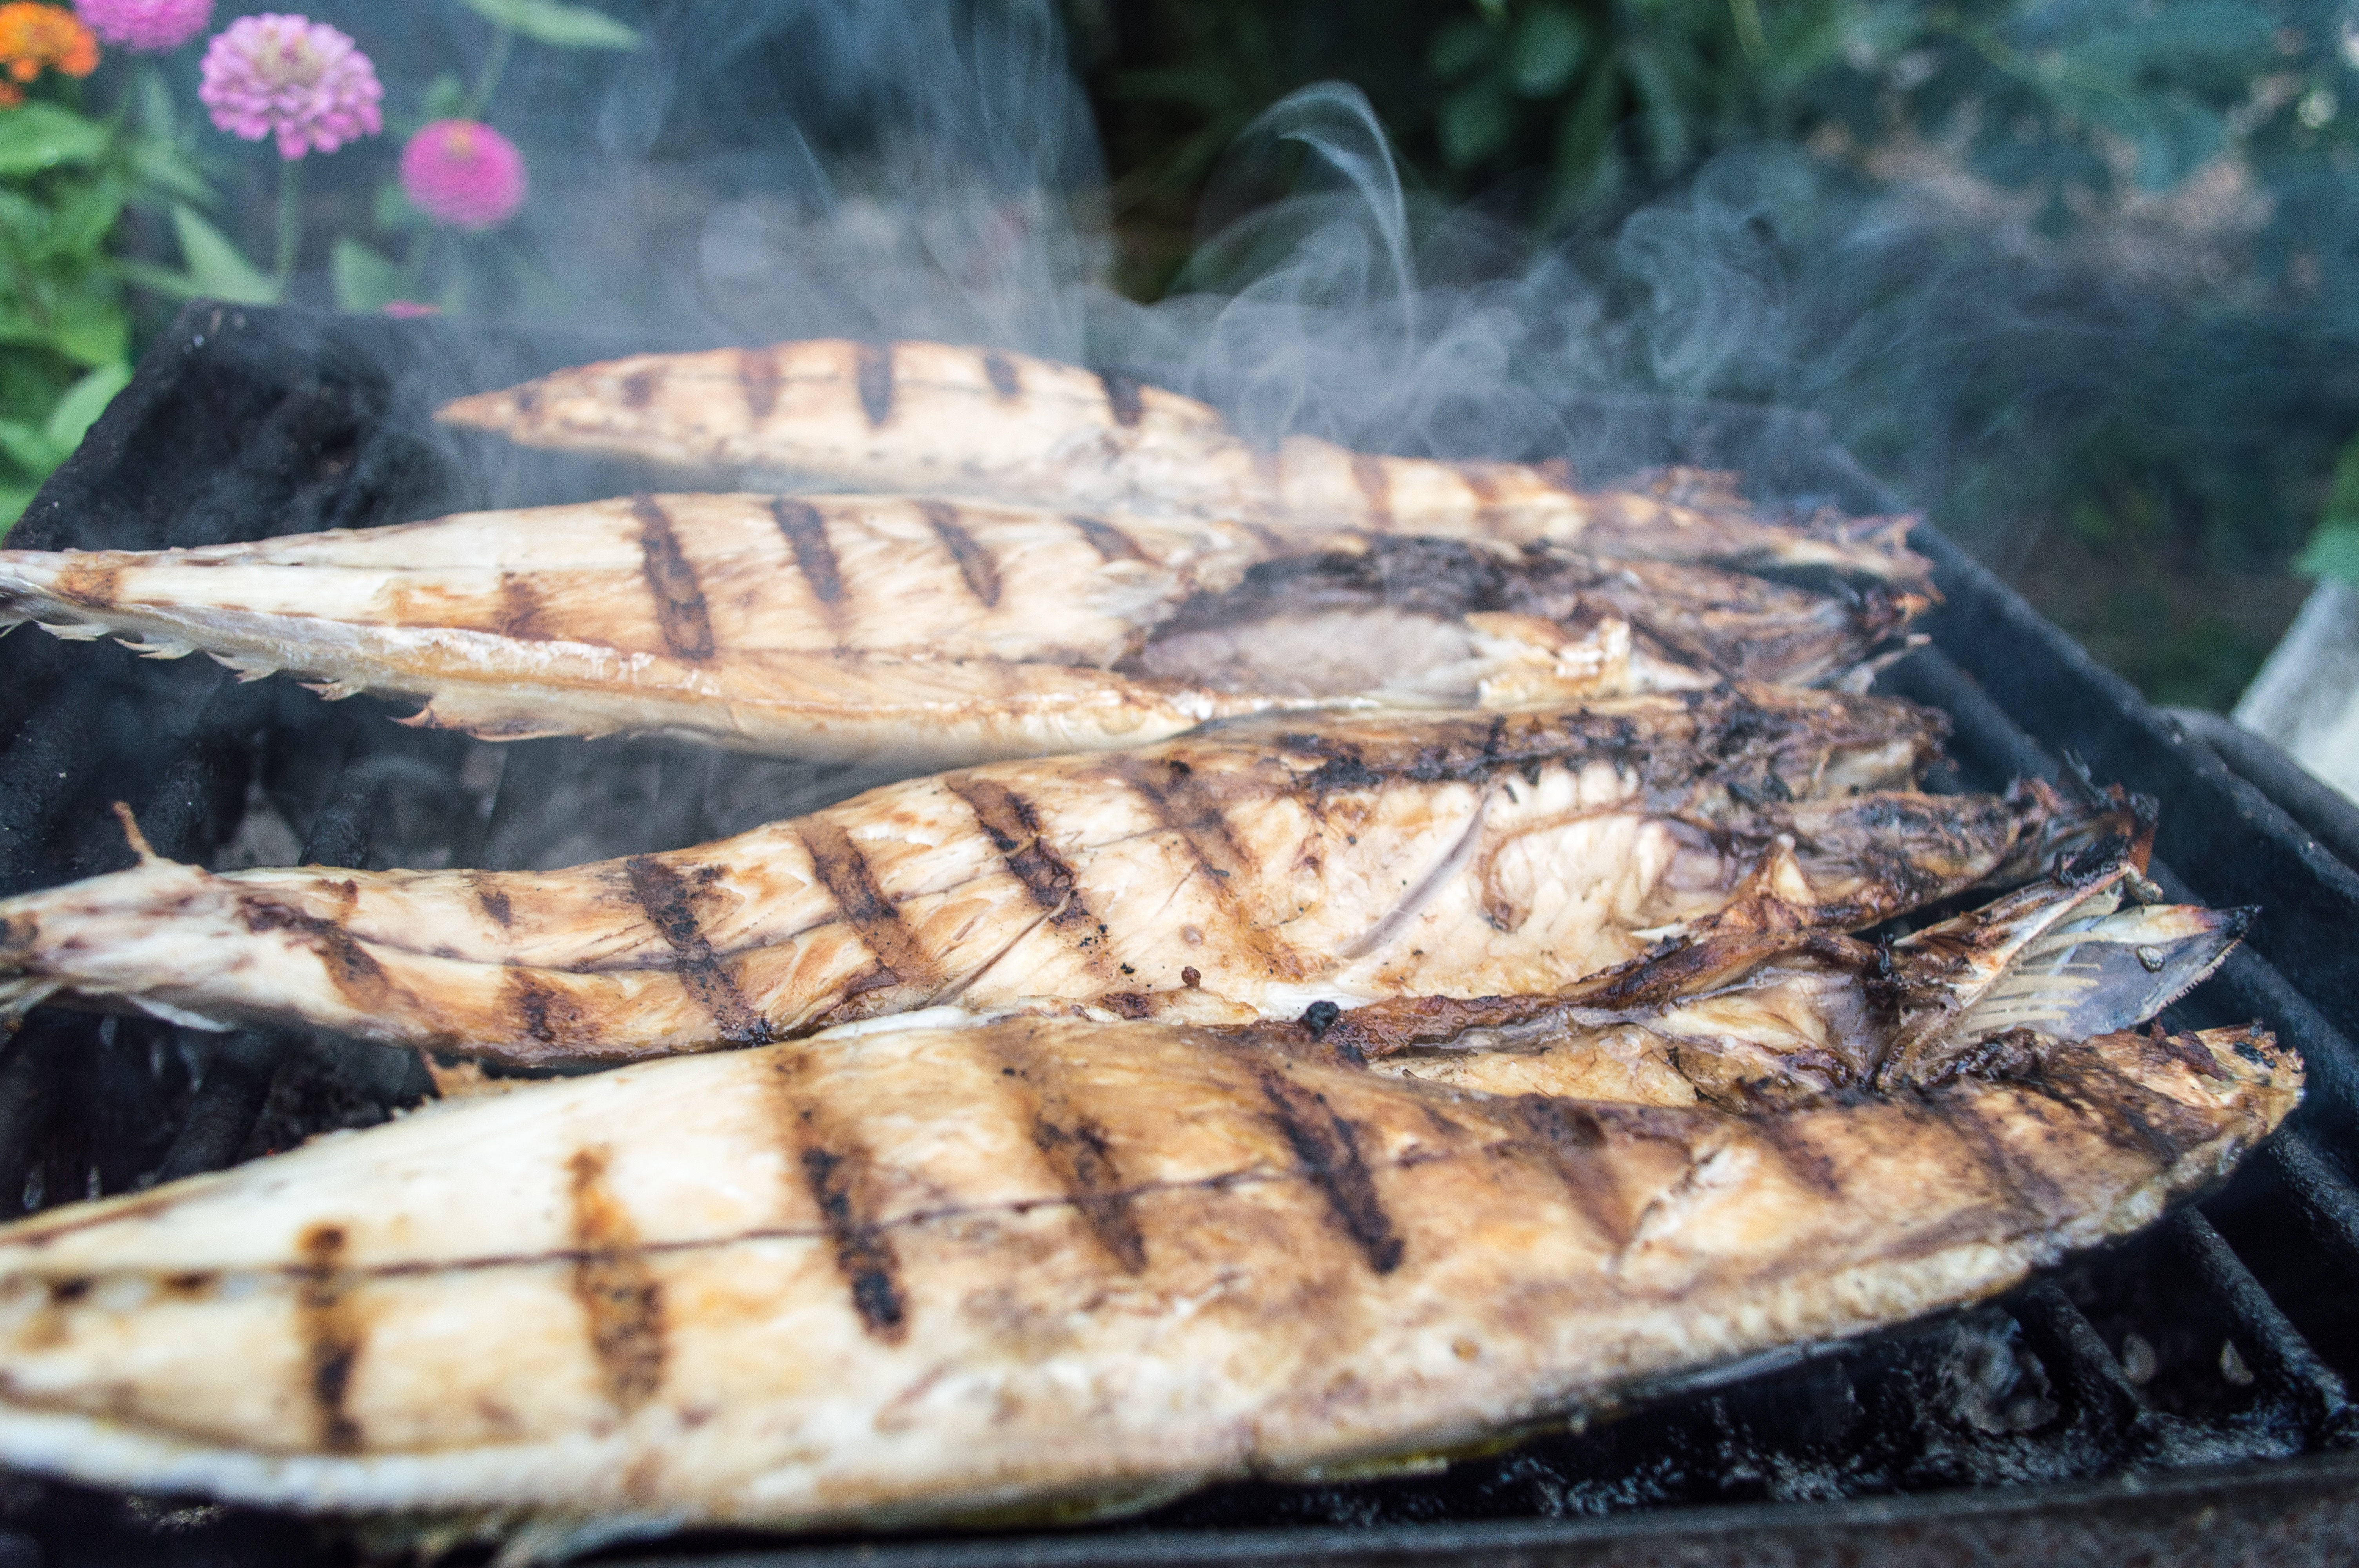 Grilled fish with brown rice